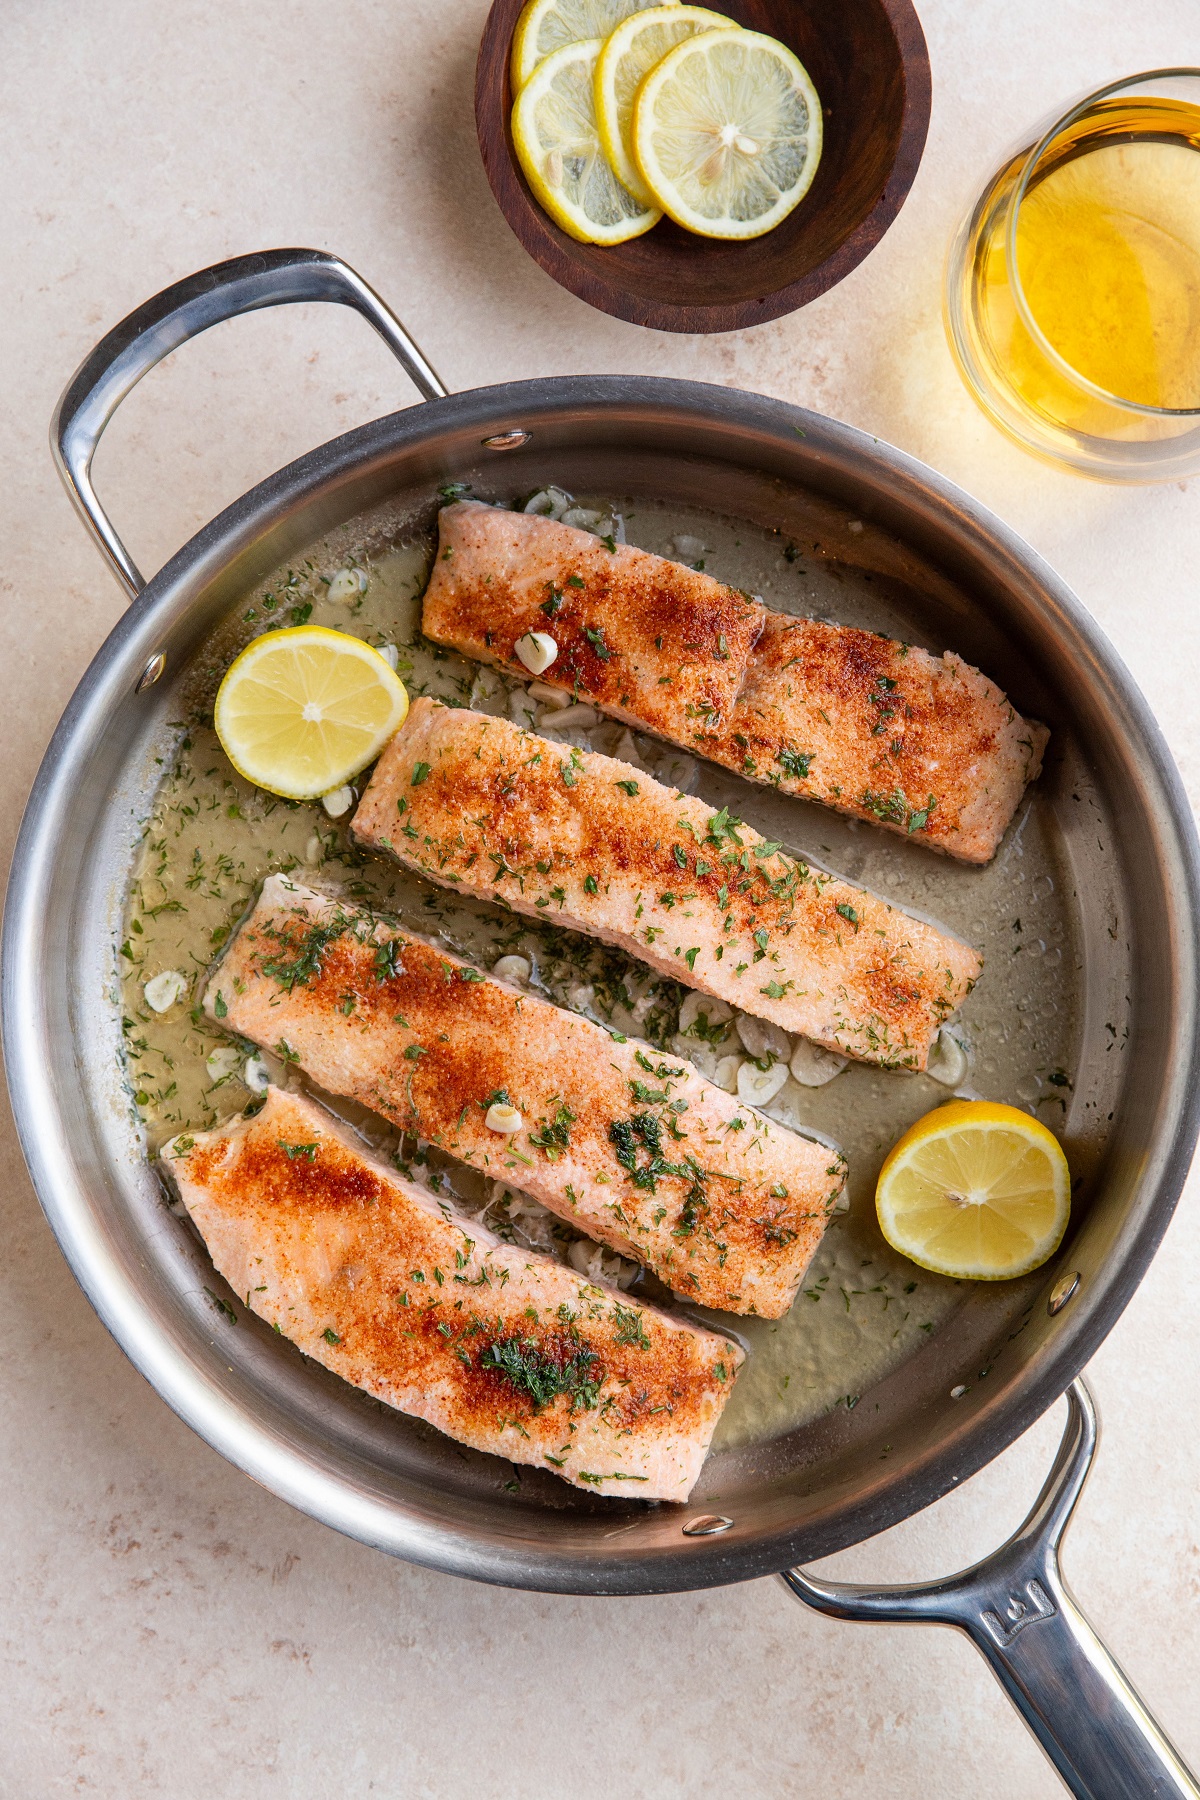 Poached salmon in a stainless steel skillet with a bowl of lemon slices and a glass of white wine to the side.